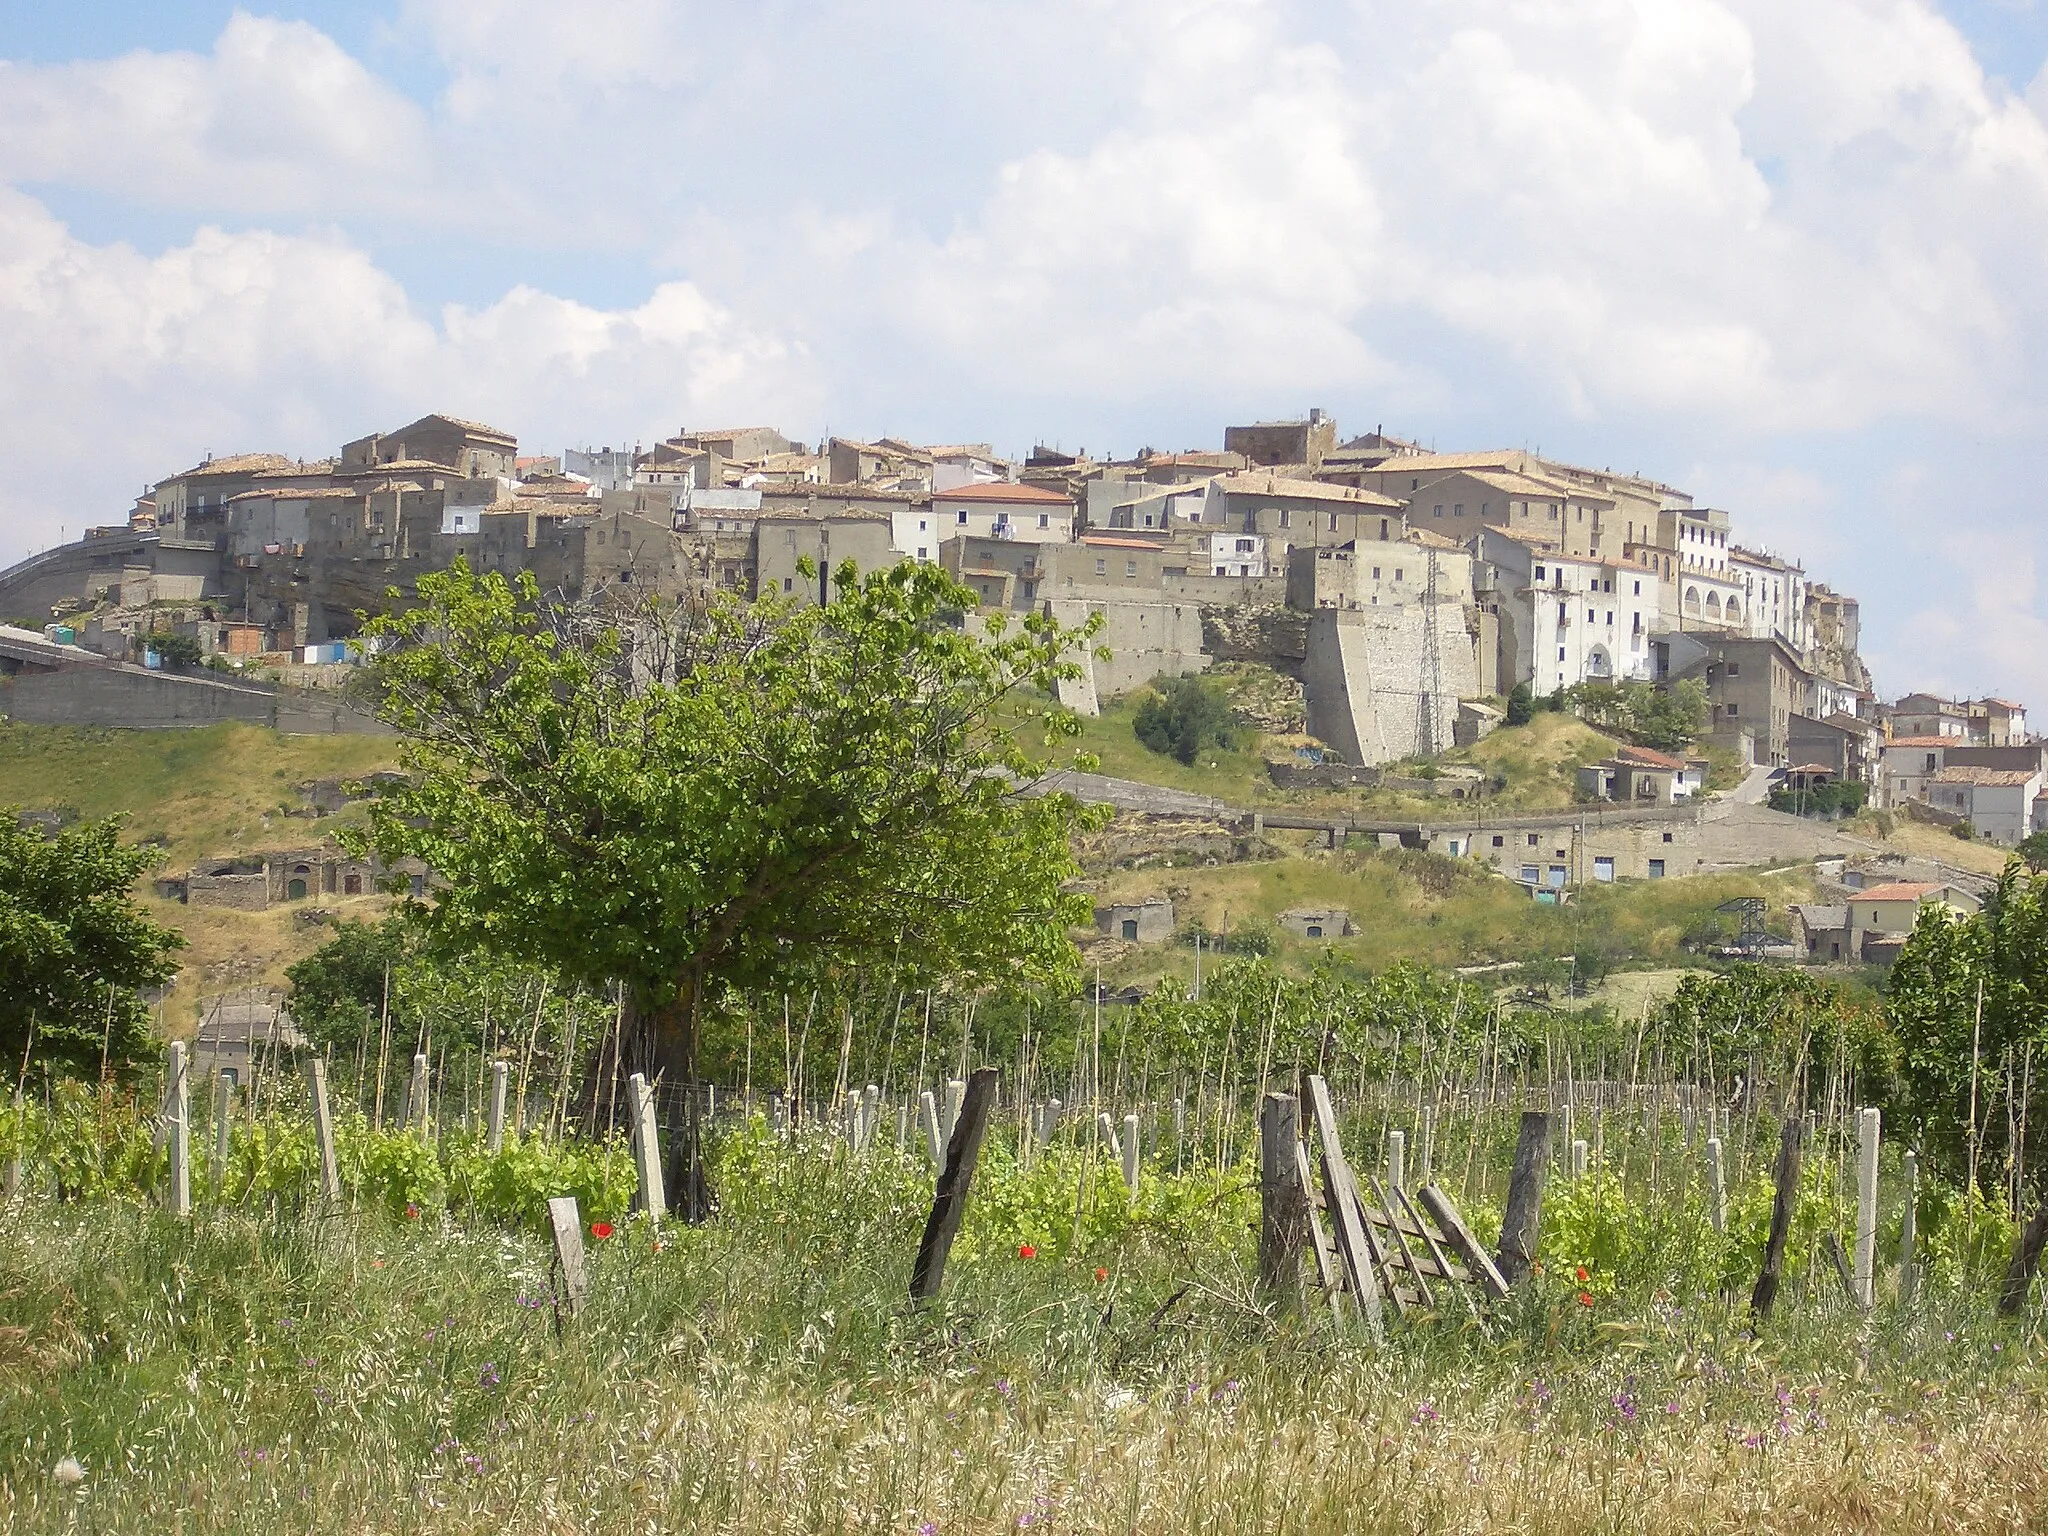 Photo showing: The walled city of Acerenza, ancient Acherontia, duchy of the Princes of Belmonte, in the region of Basilicata. It is located in the province of Potenza, Italy.